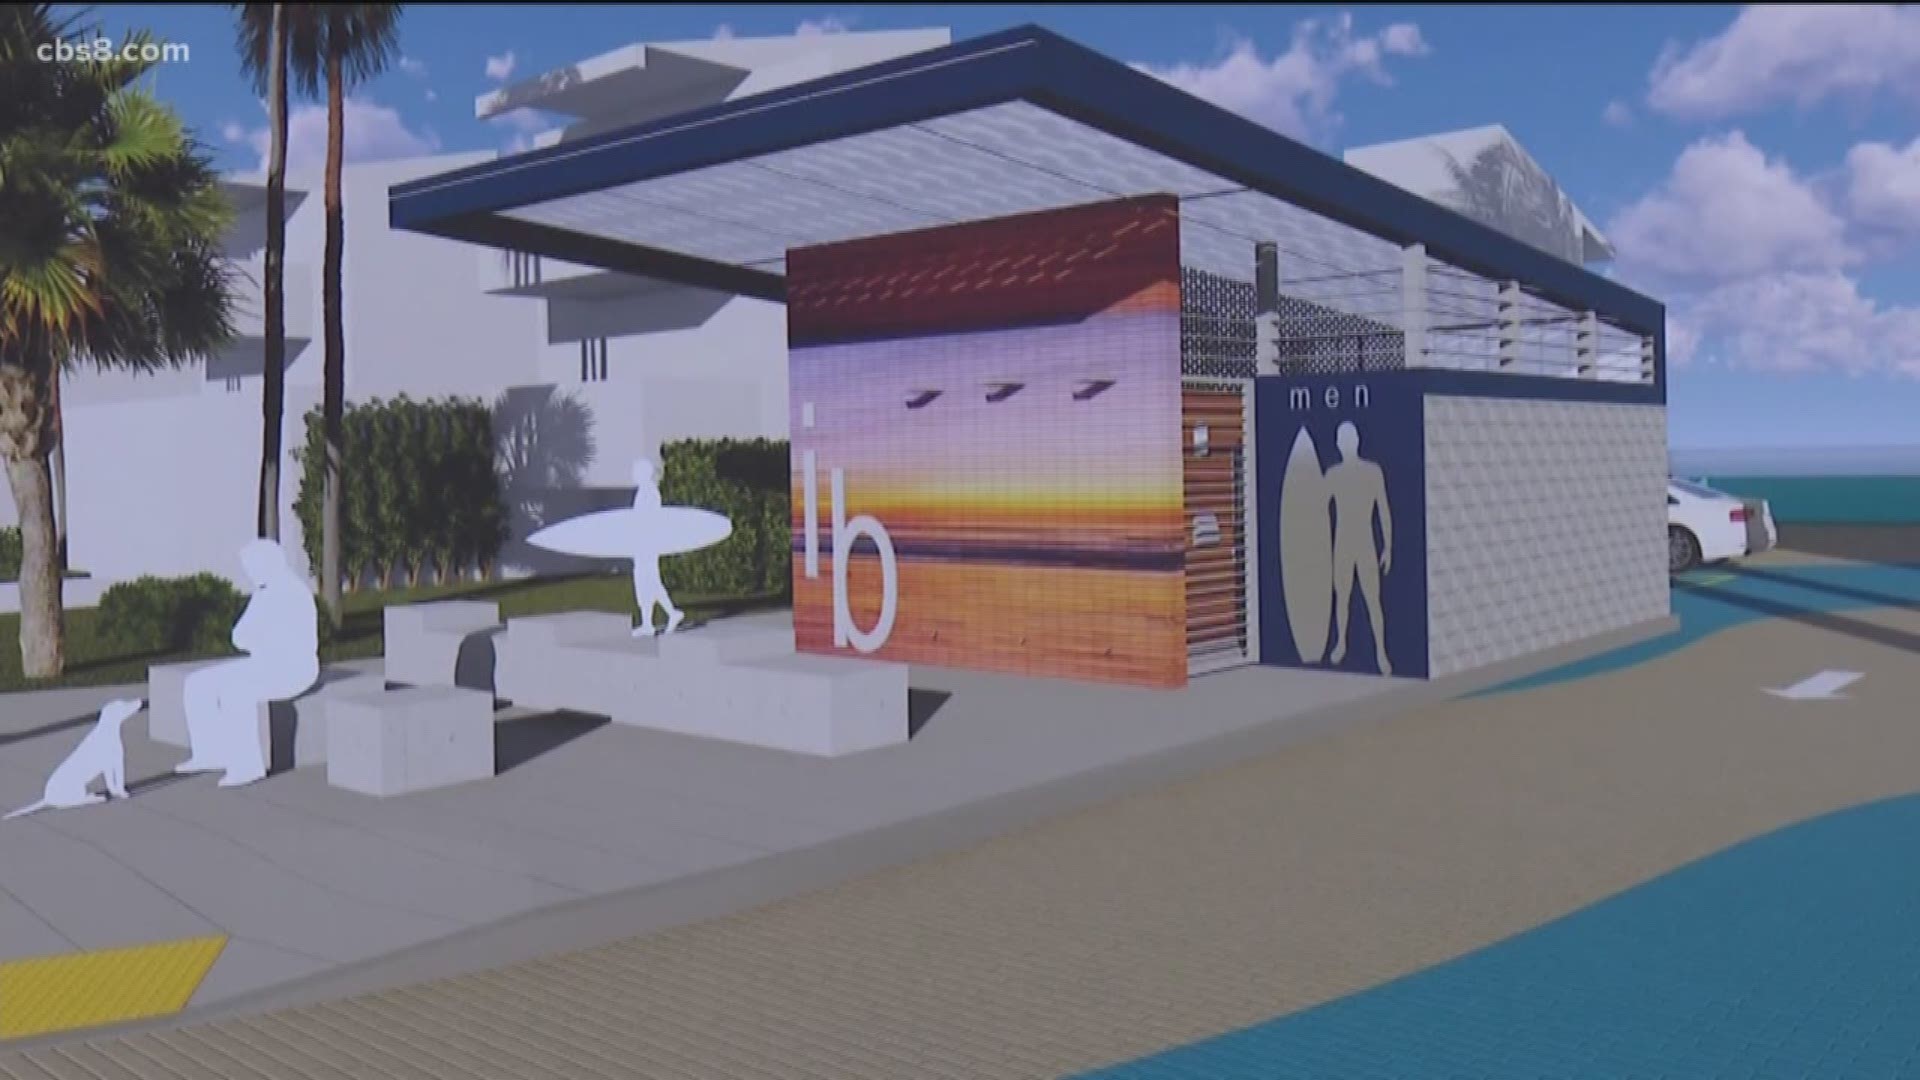 The Imperial Beach City Council on Wednesday recommended the San Diego Port Authority flush the idea of a comfort station, or showers and restrooms, for beachgoers and instead transfer the $1.8 million towards improving the pier.